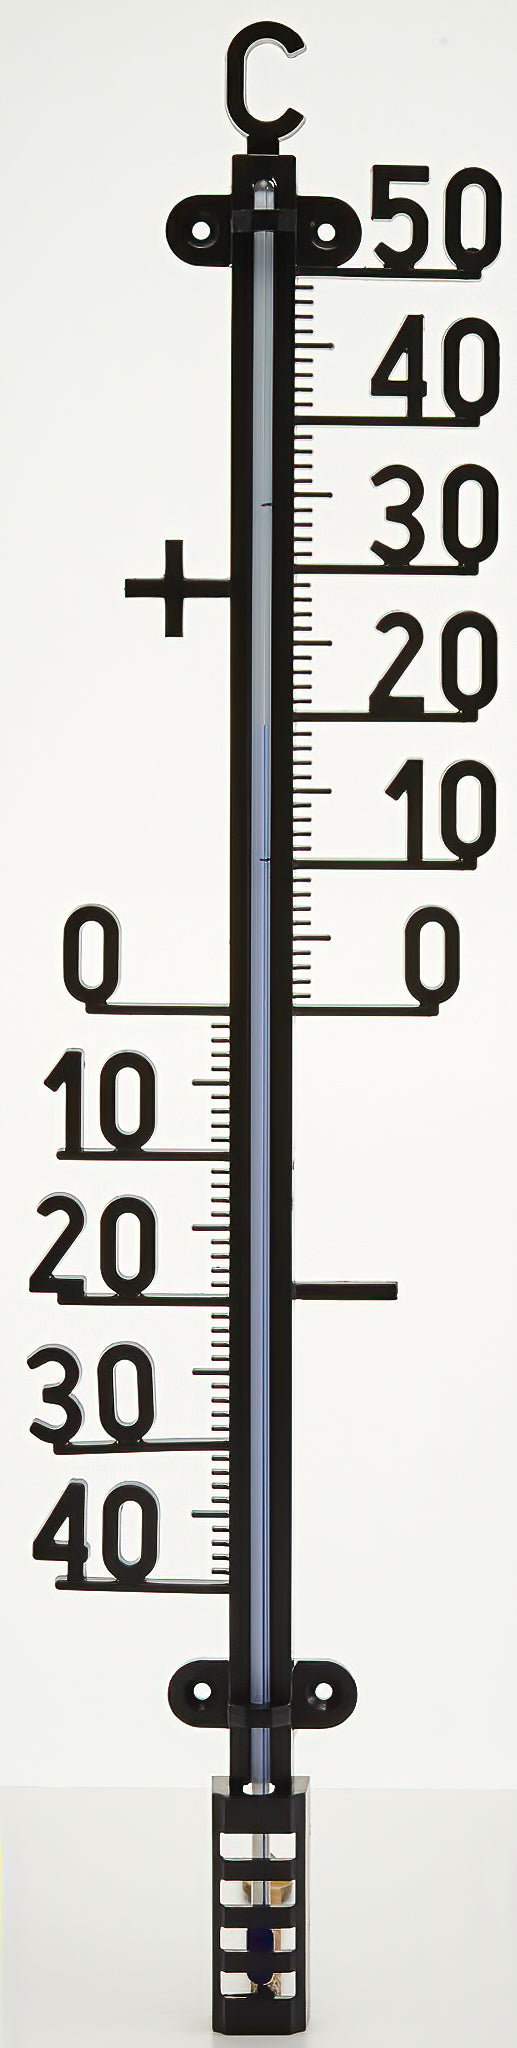 Outdoor Classic Thermometer